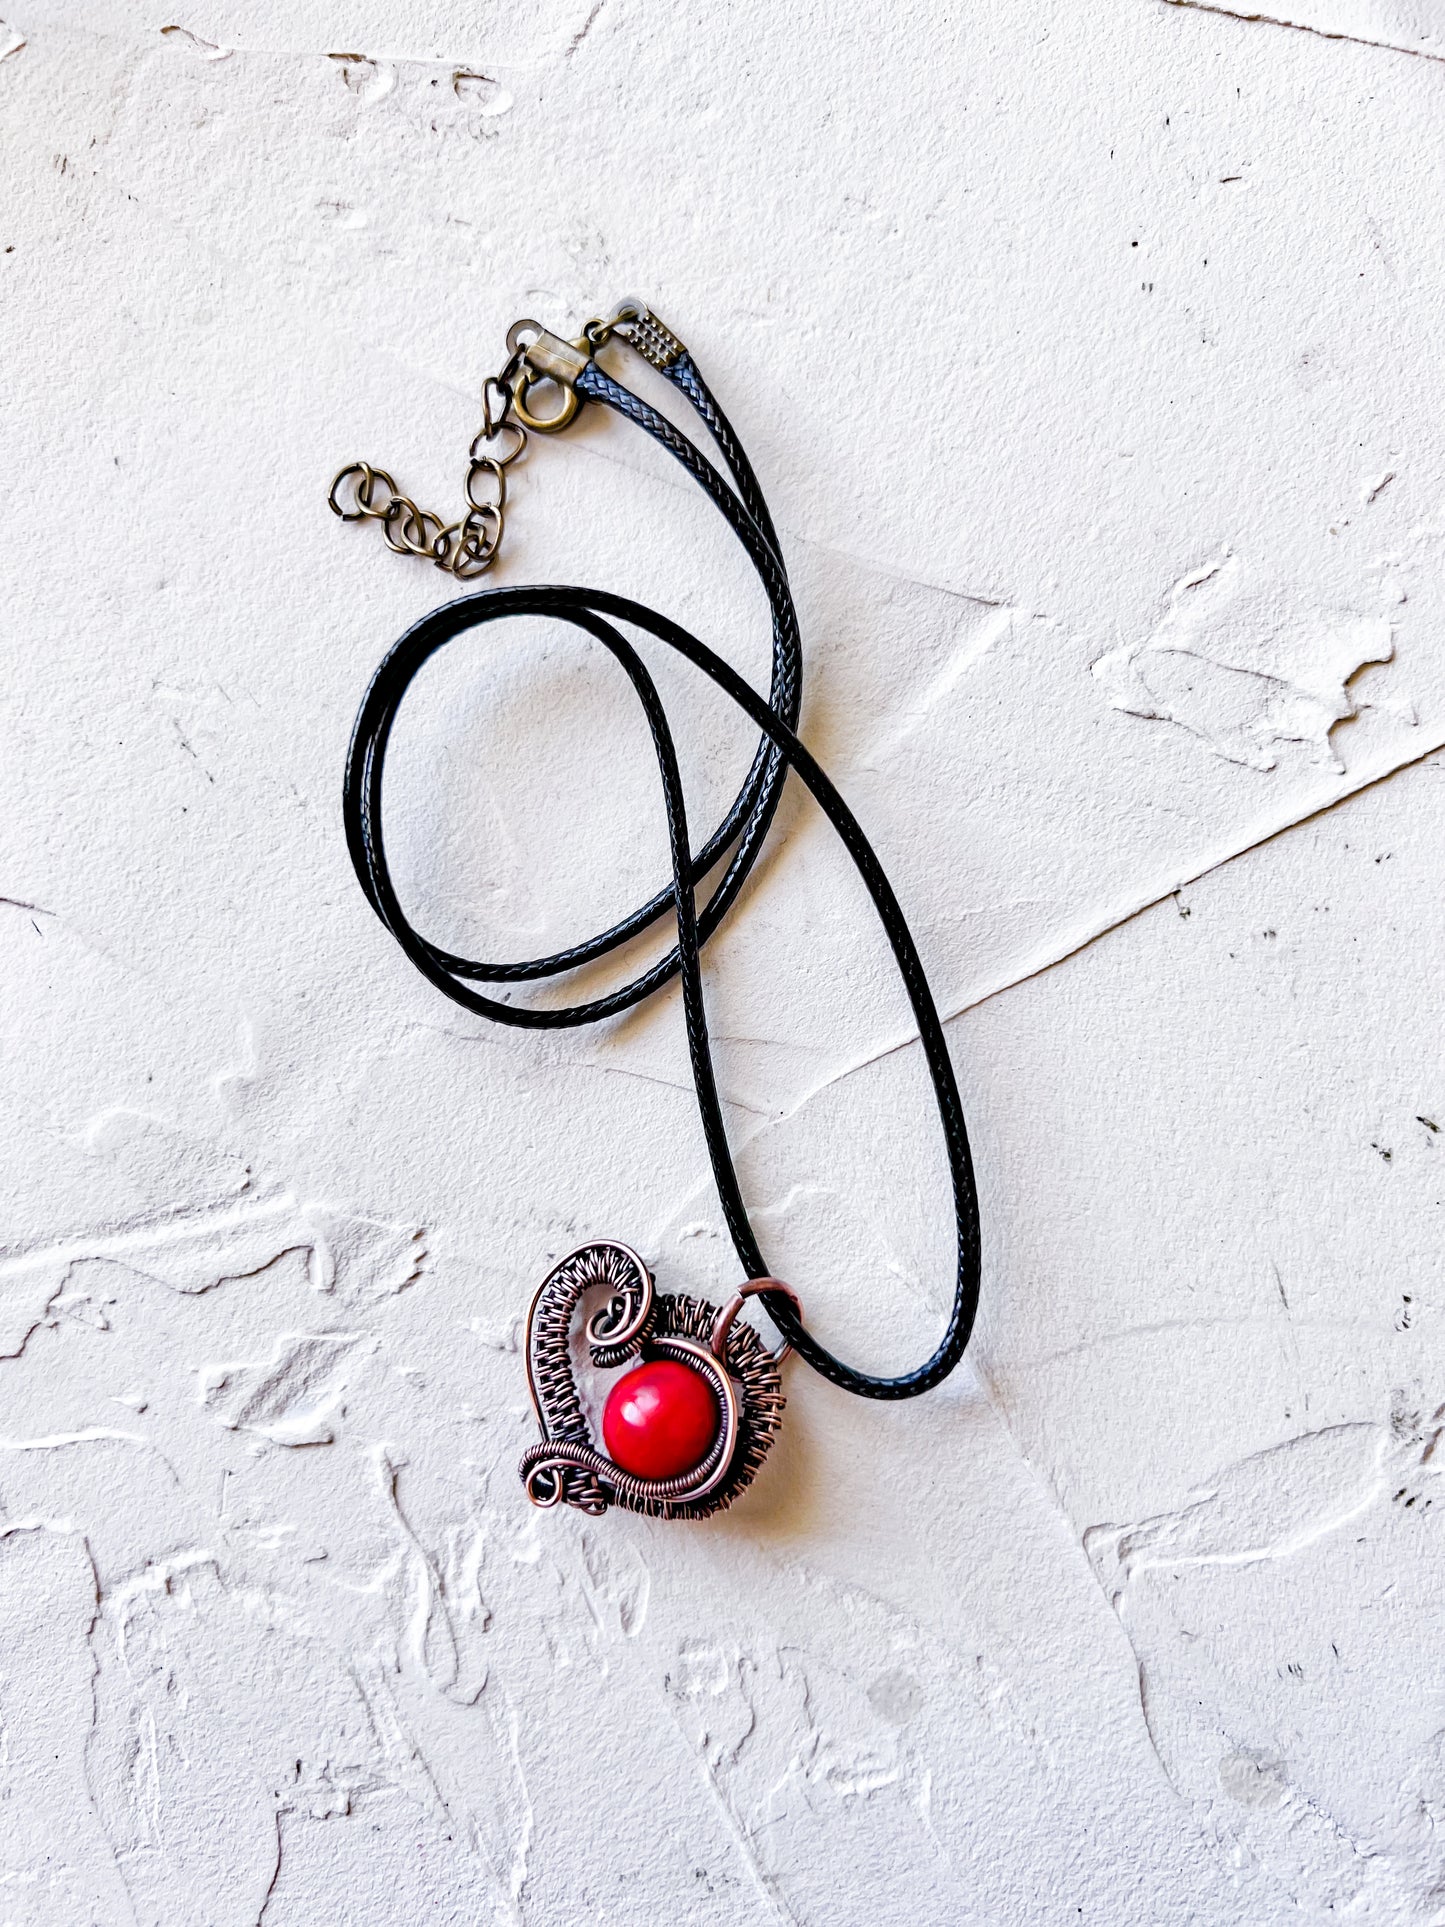 Woven Heart with bead